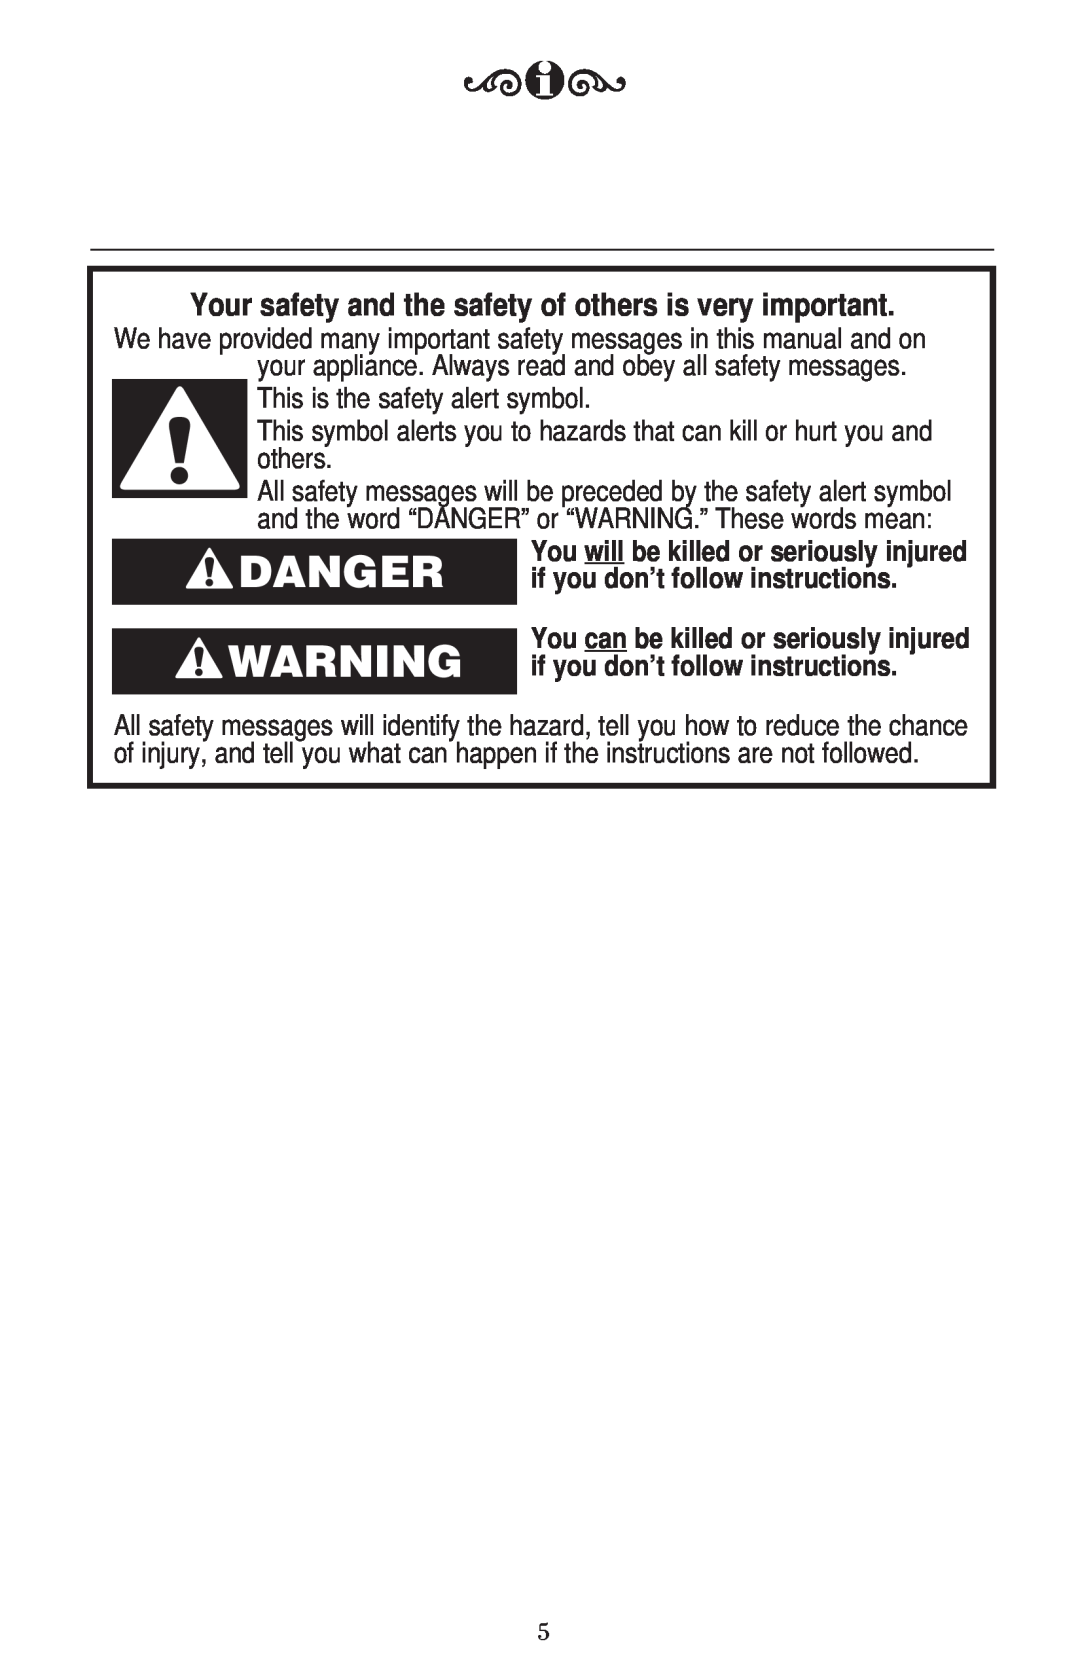 KitchenAid KTT220 manual Danger, Your safety and the safety of others is very important, This is the safety alert symbol 